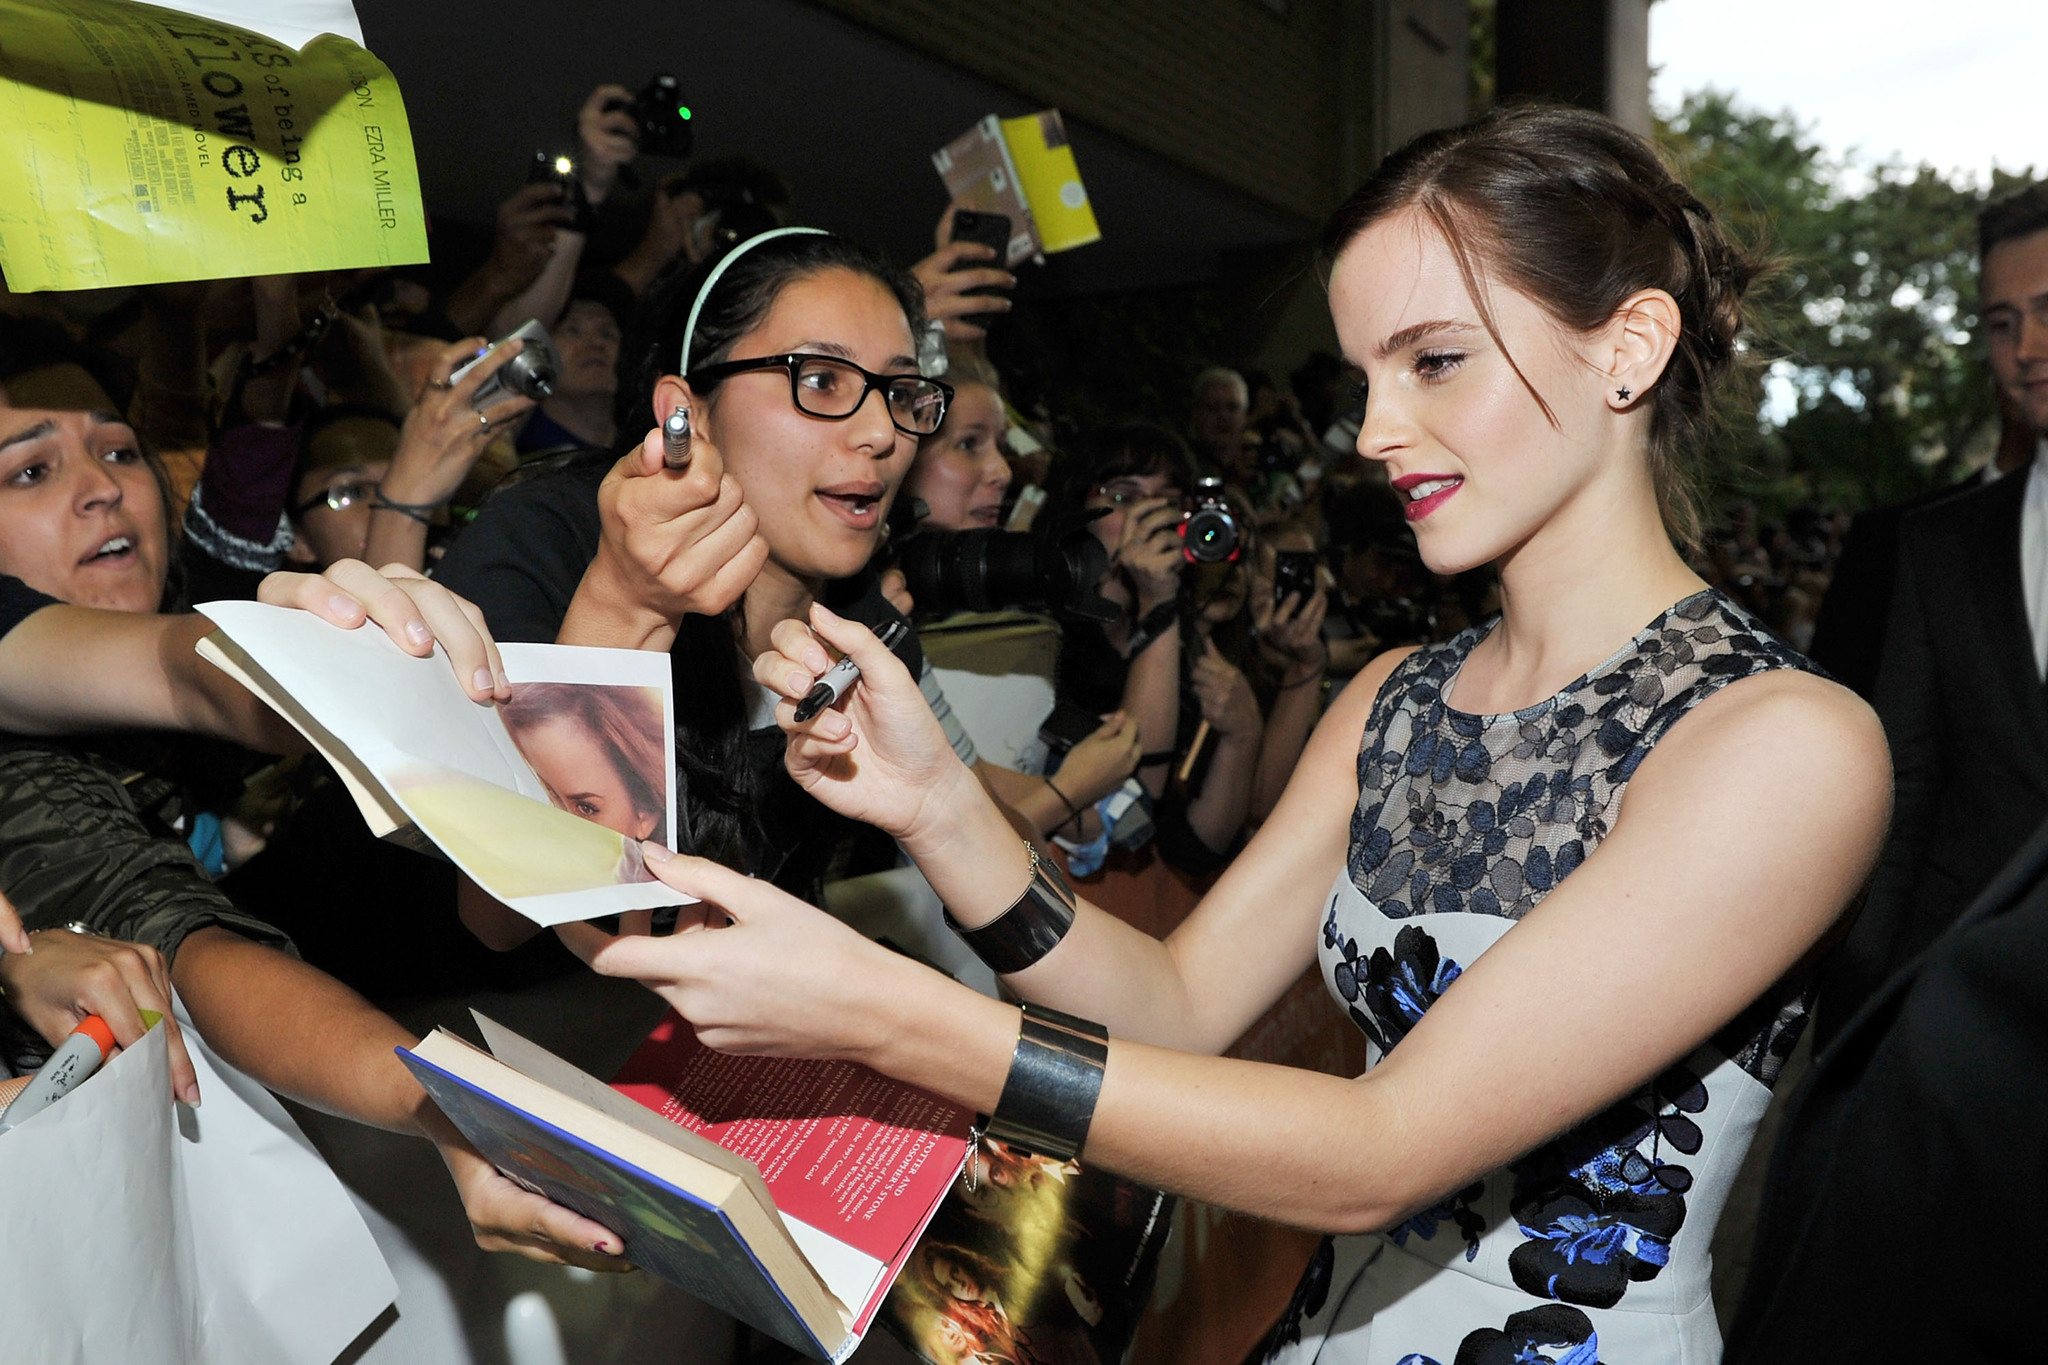 Emma Watson at event of The Perks of Being a Wallflower (2012)